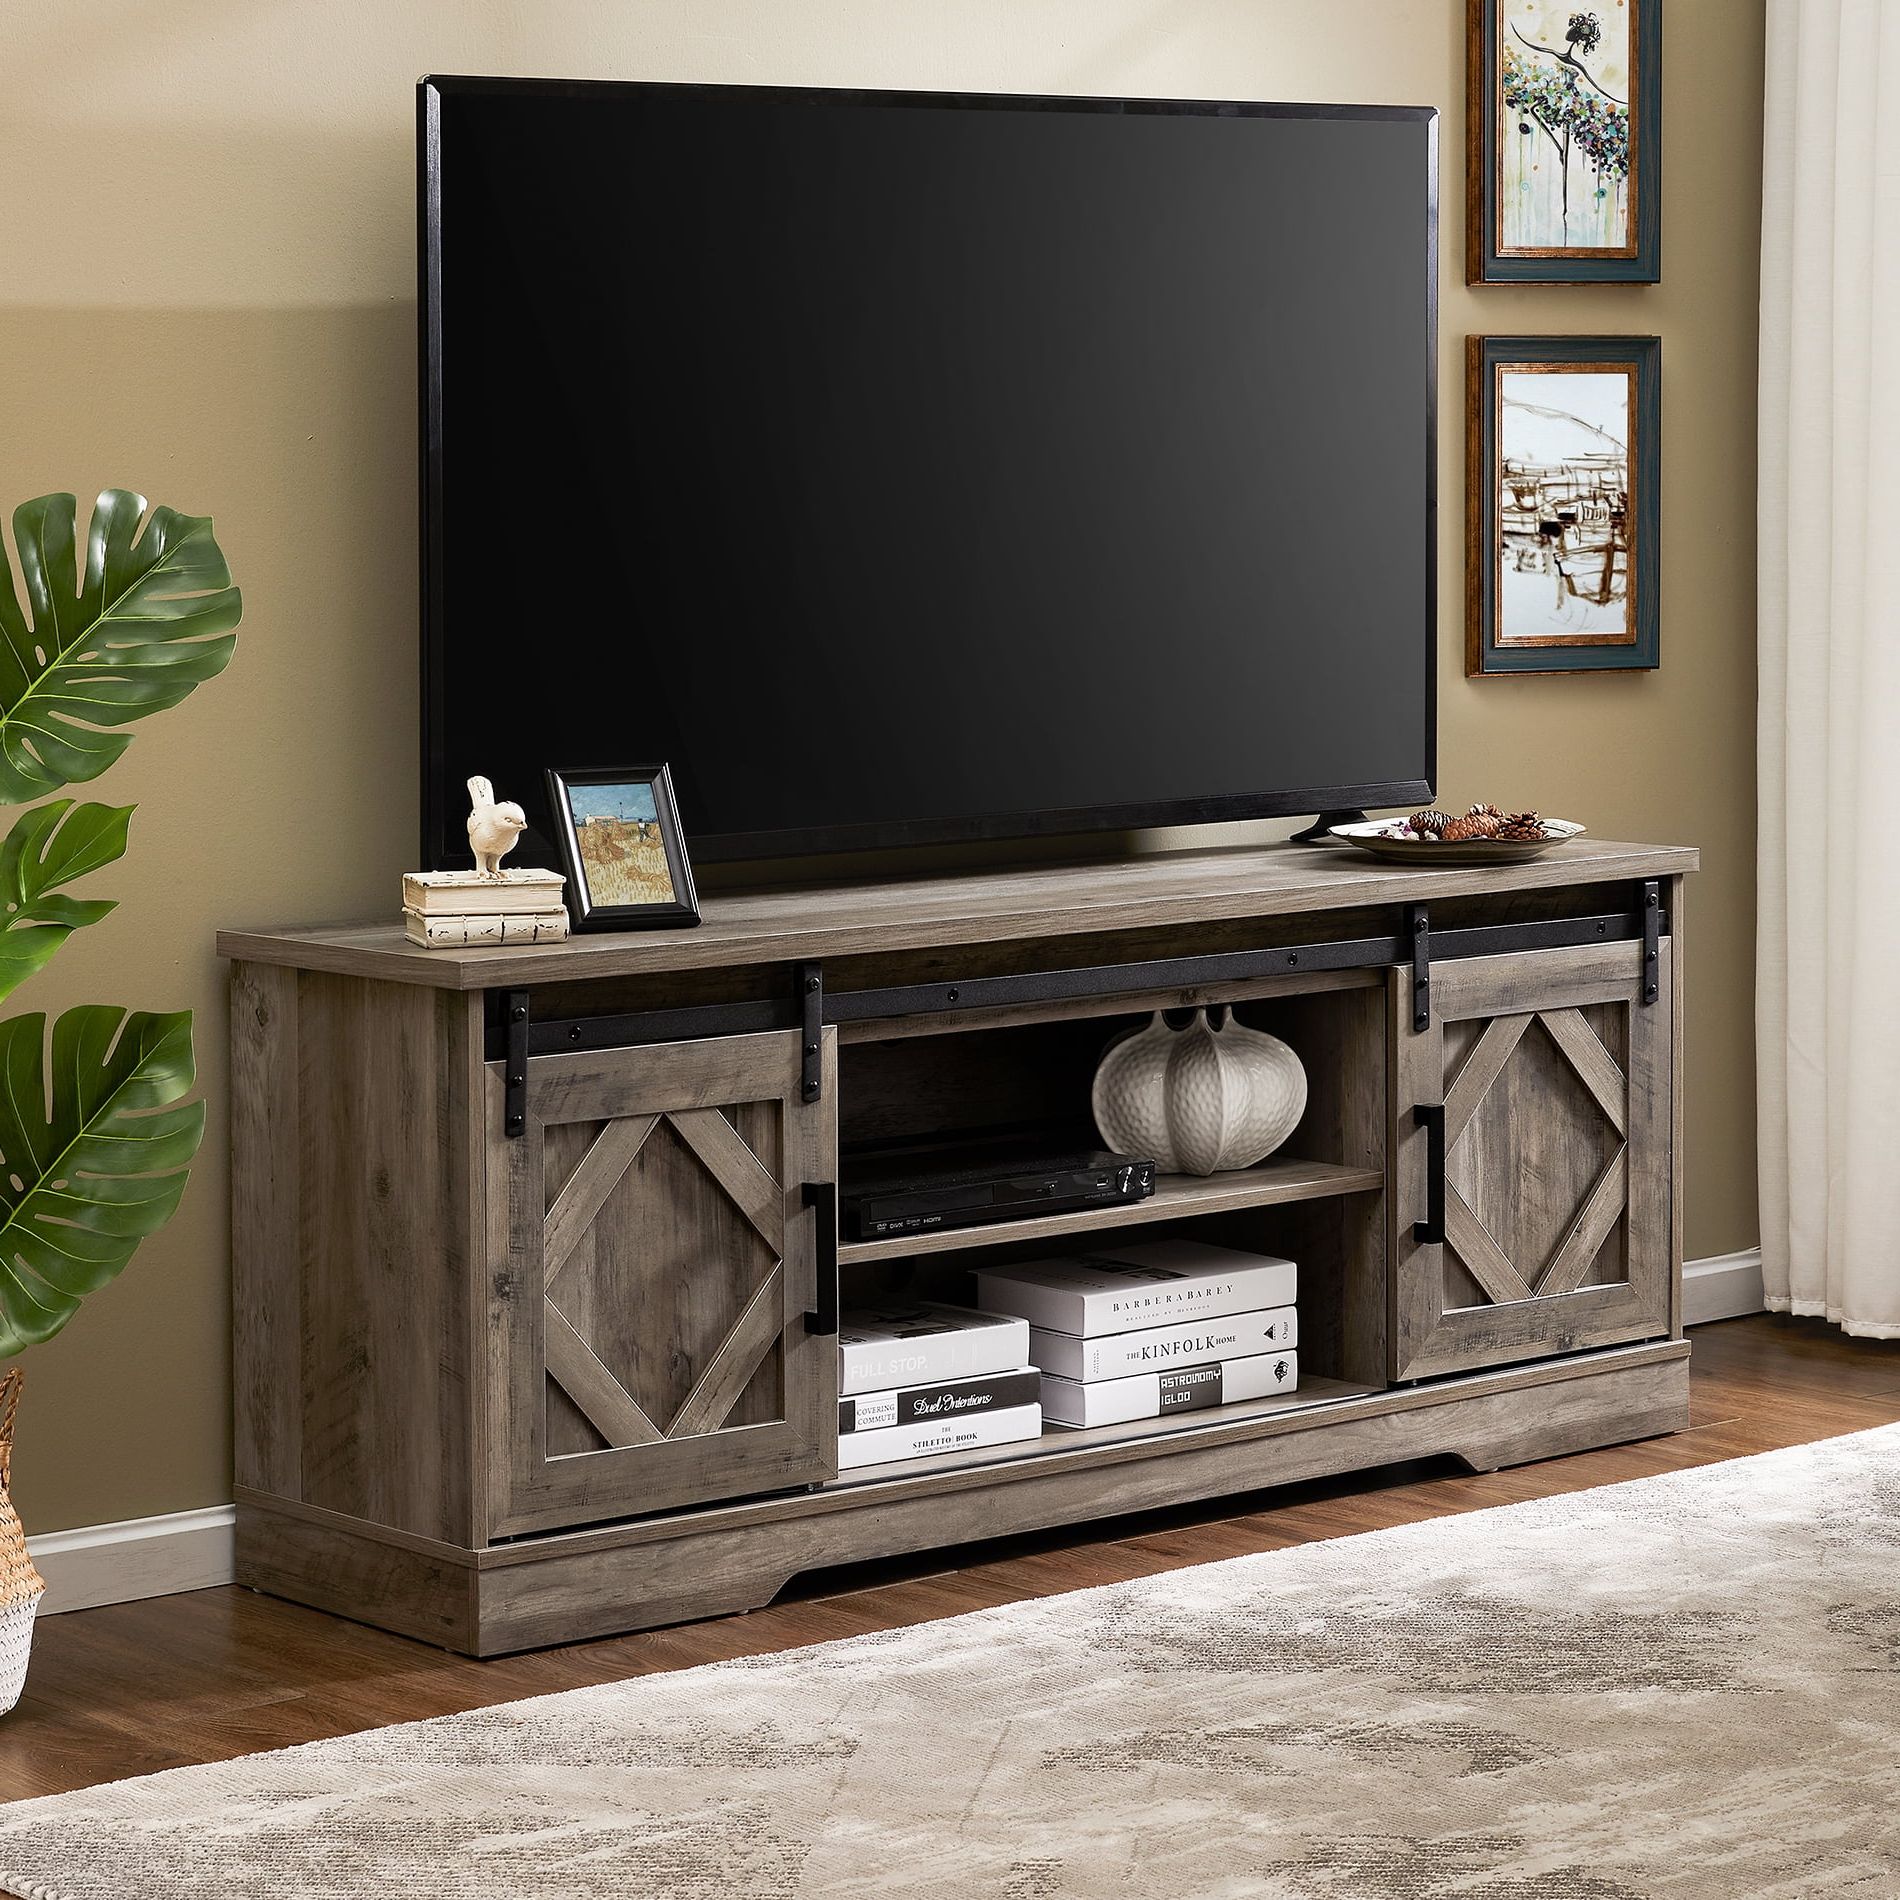 2019 Buy Wampat Farmhouse Tv Stand For Tv Up To 70 Barn Door Media Console Throughout Barn Door Media Tv Stands (View 5 of 15)